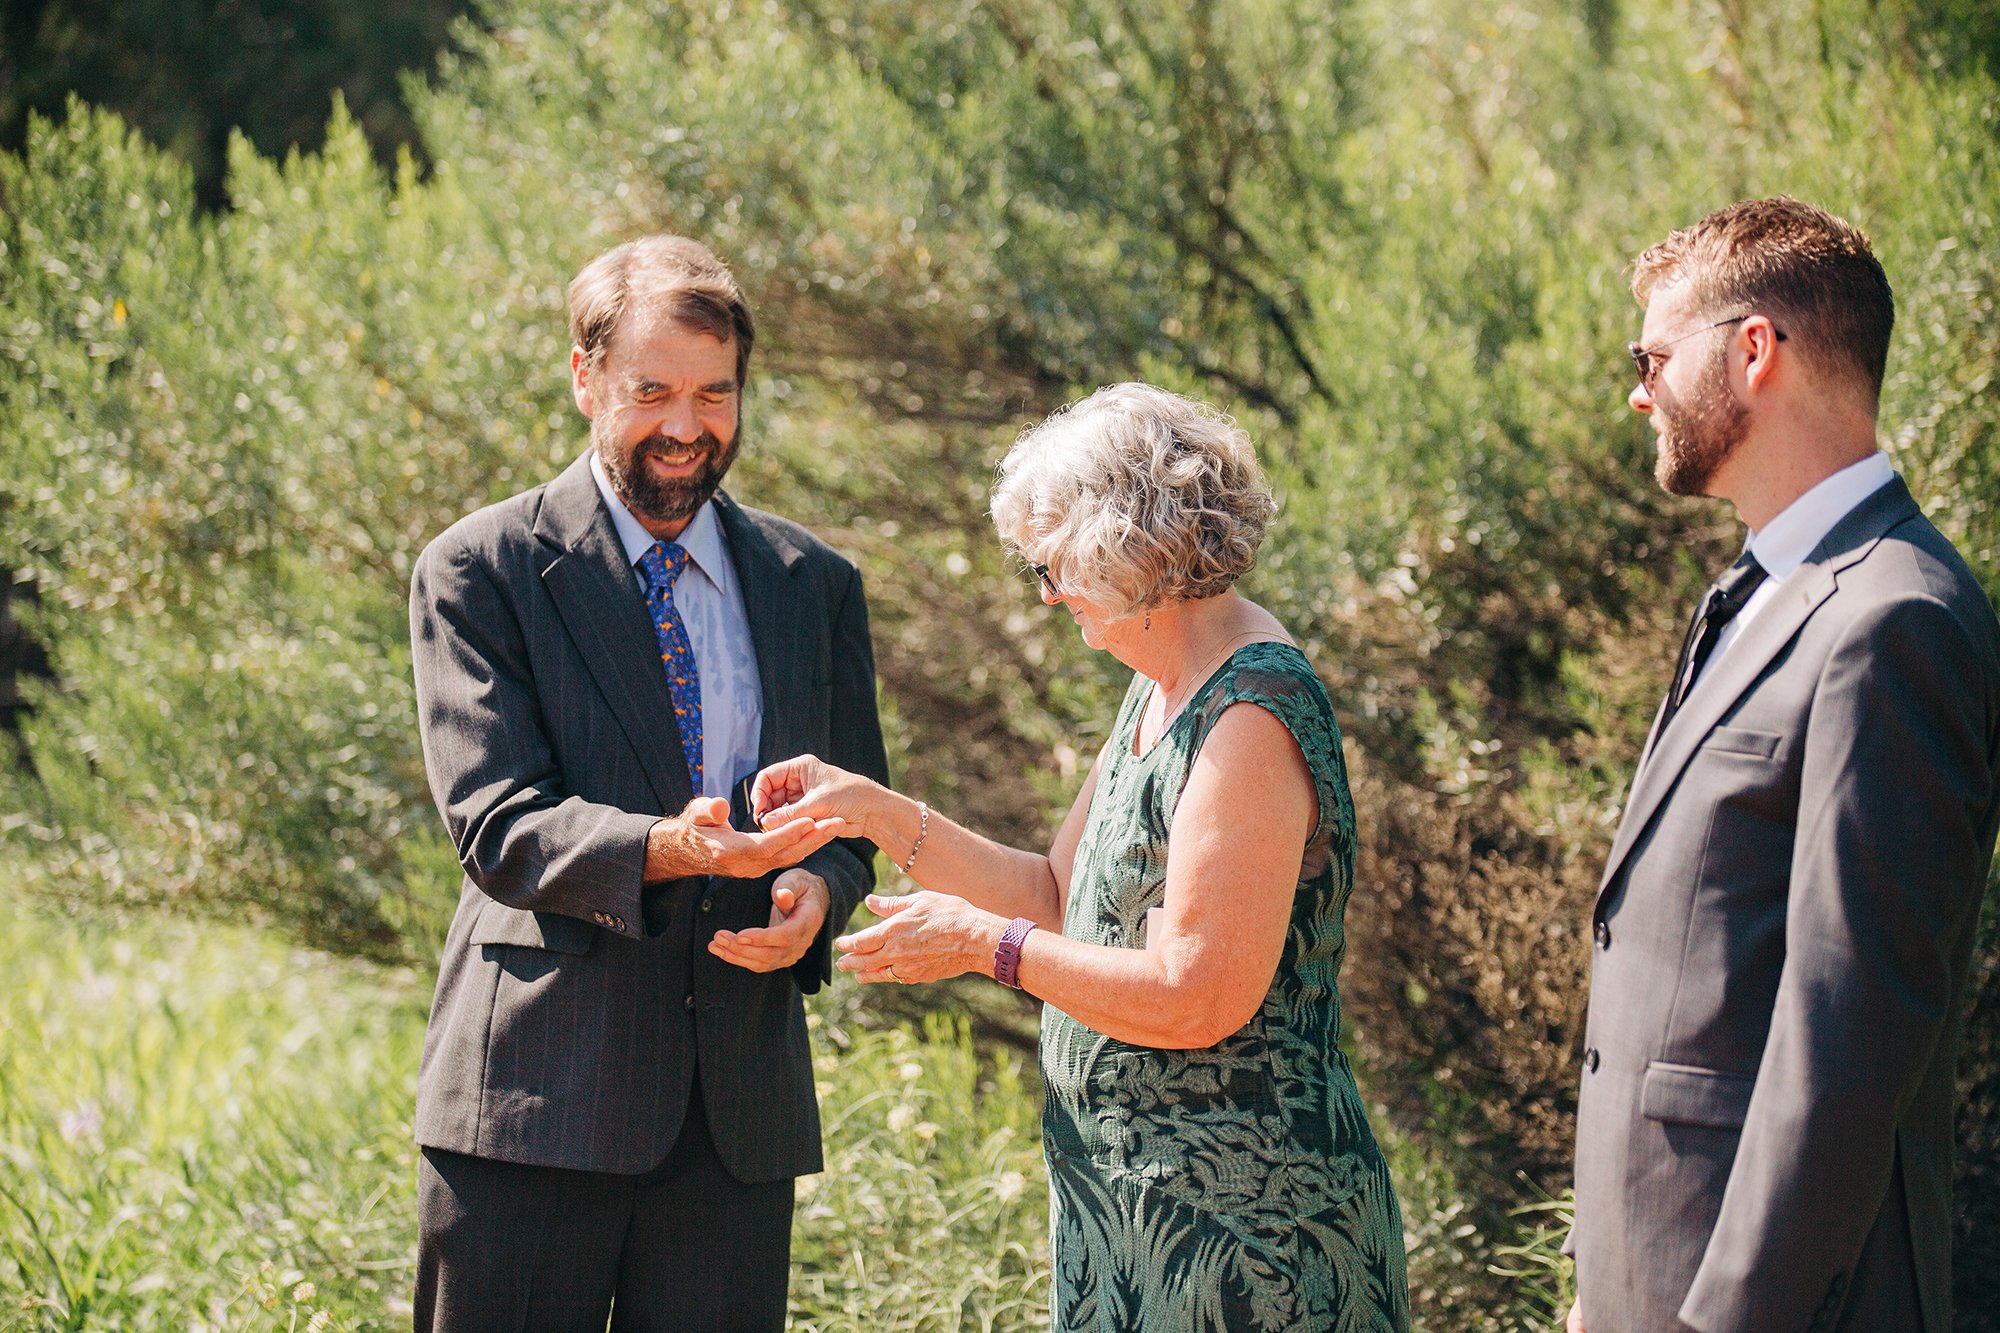 The groom's parents smile at eachother during the ring warming ceremony at this Sedona elopement